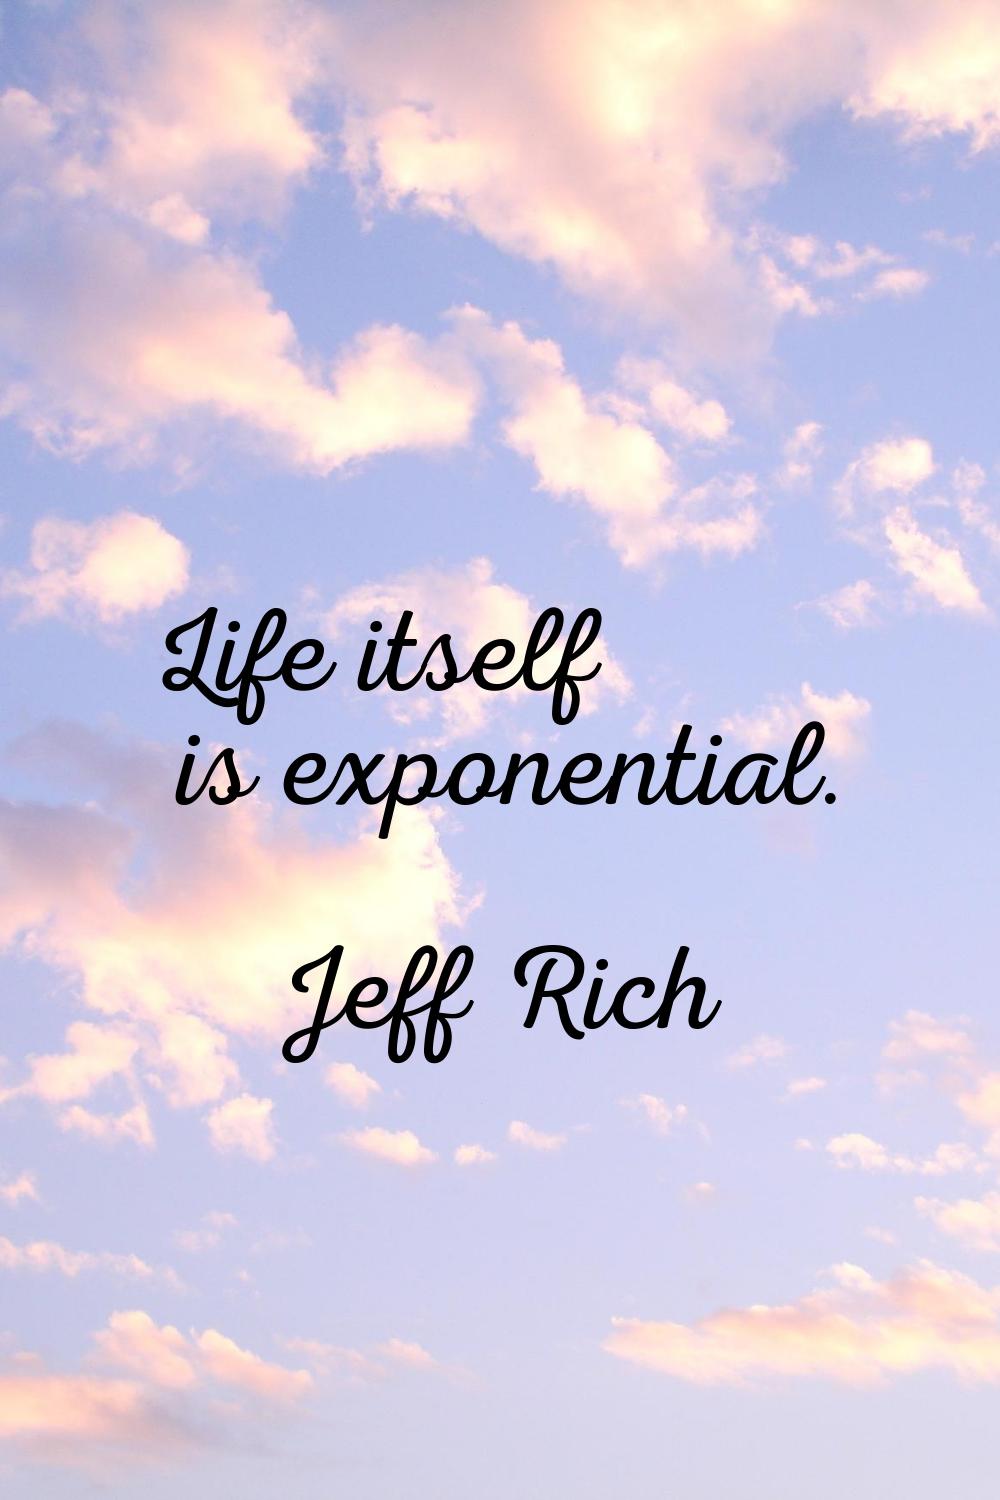 Life itself is exponential.